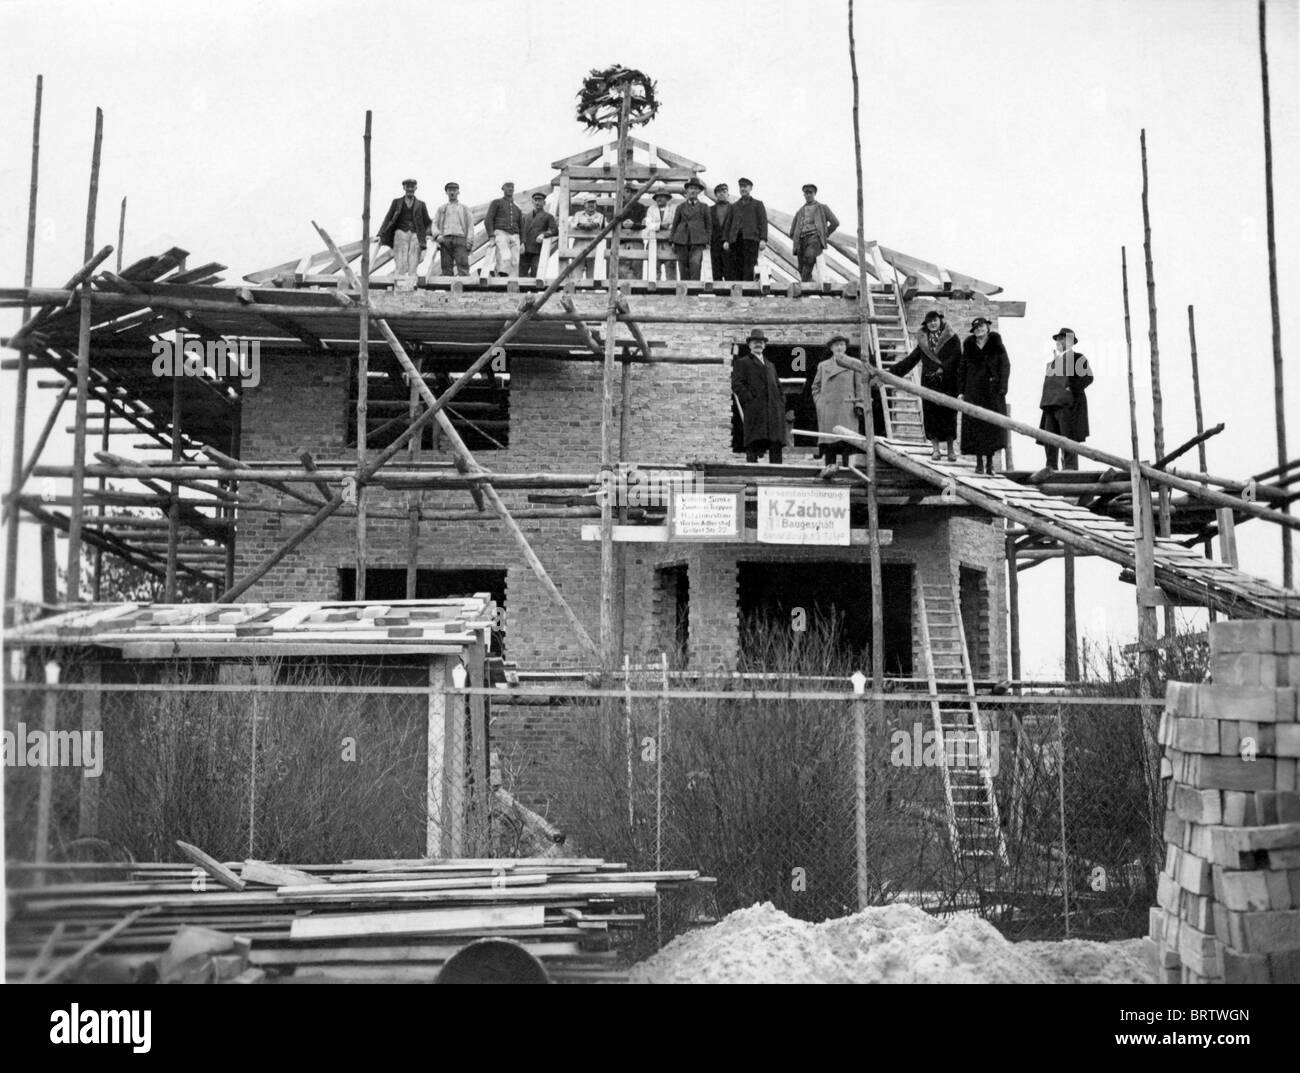 Construction workers, topping-out ceremony, historical image, ca. 1930 Stock Photo